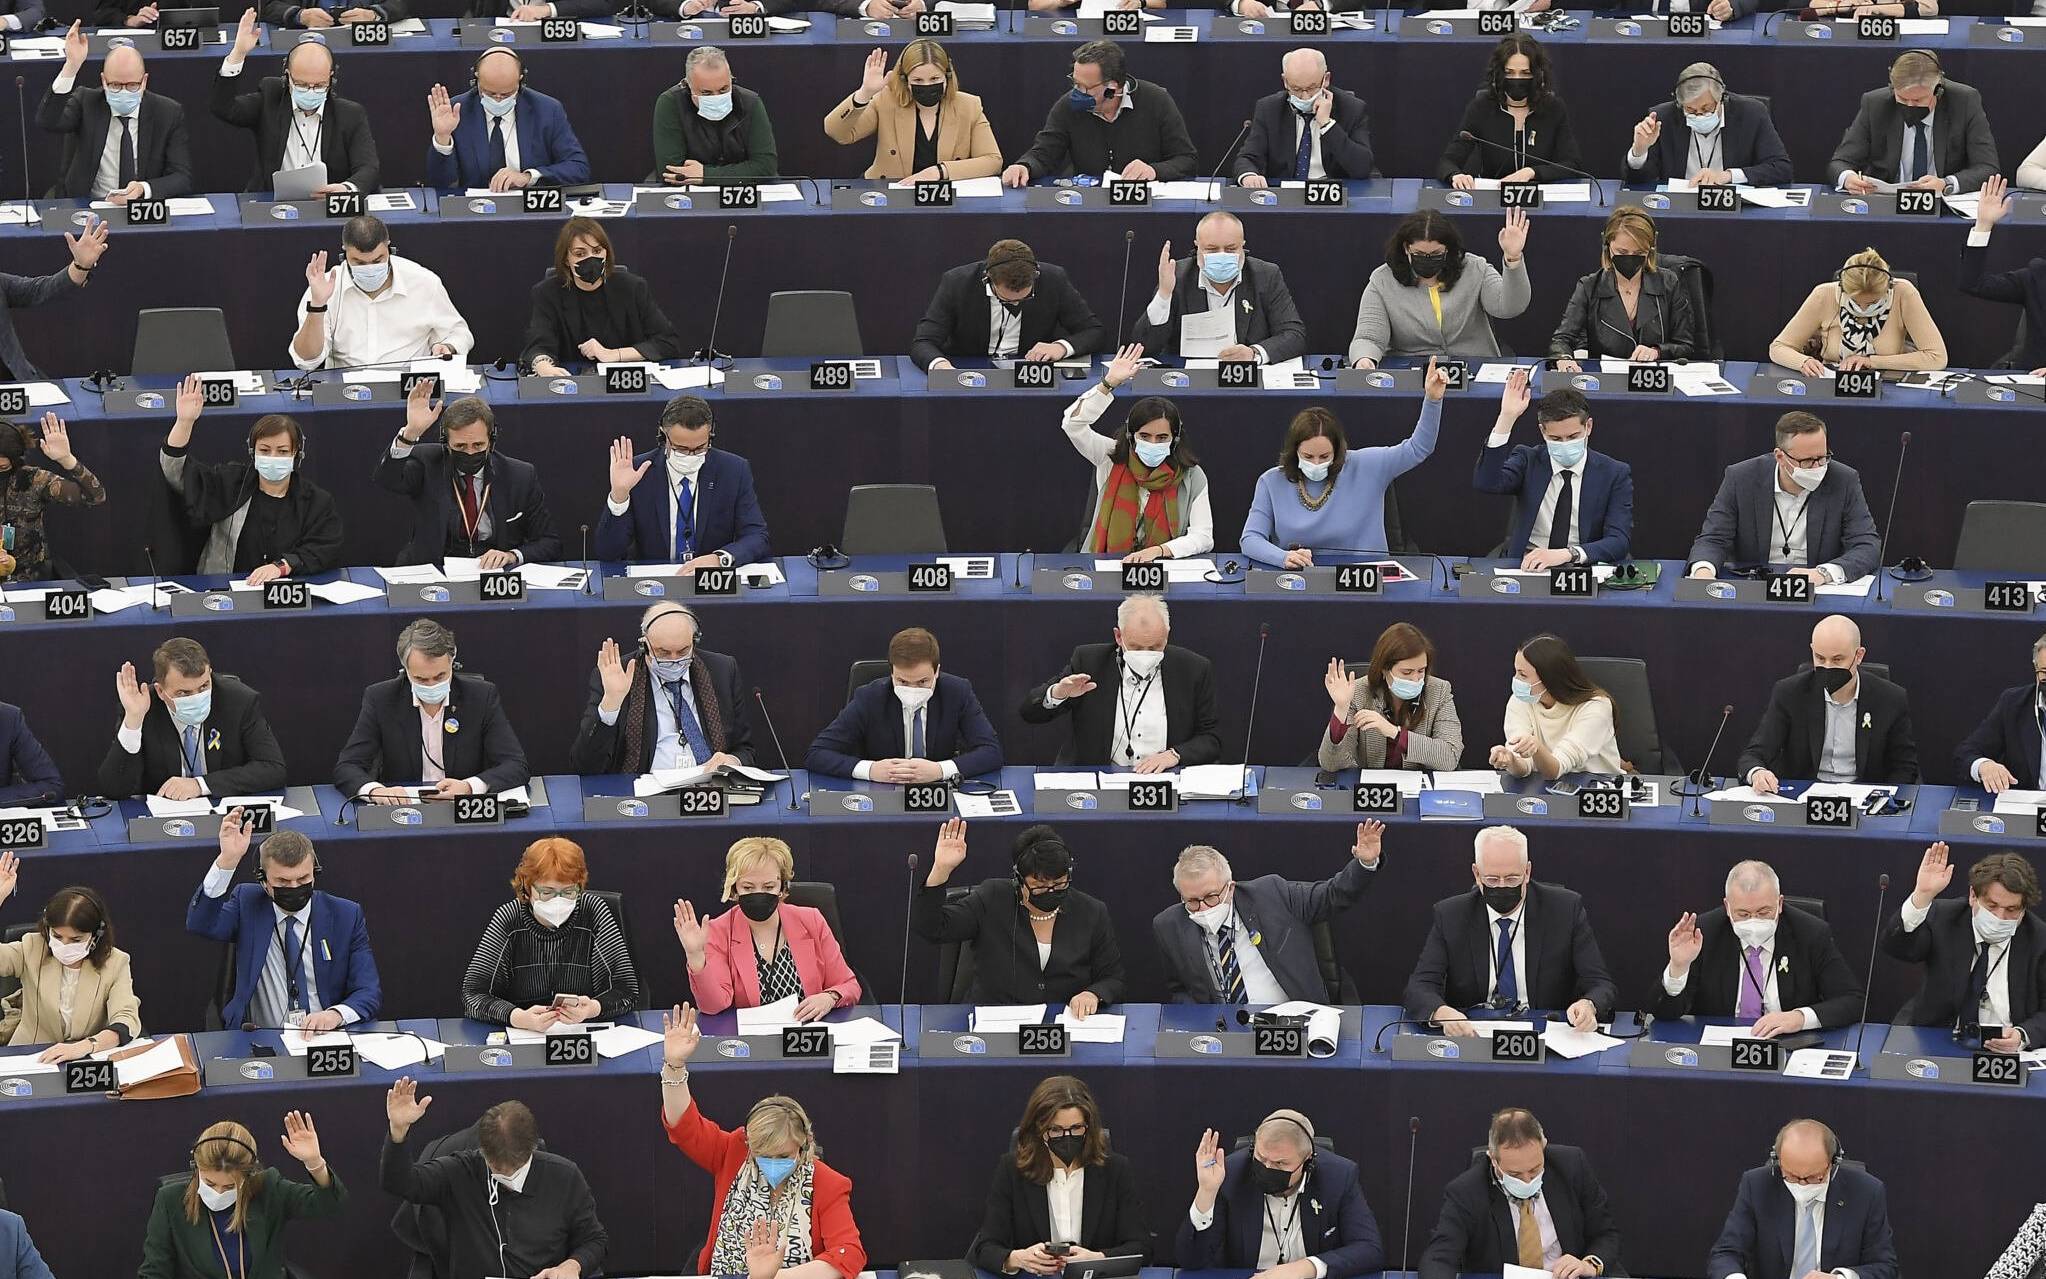 Members of the European Parliament take part in a voting session during a plenary session at the European Parliament in Strasbourg, eastern France, on April 5, 2022. (Photo by Frederick FLORIN / AFP)